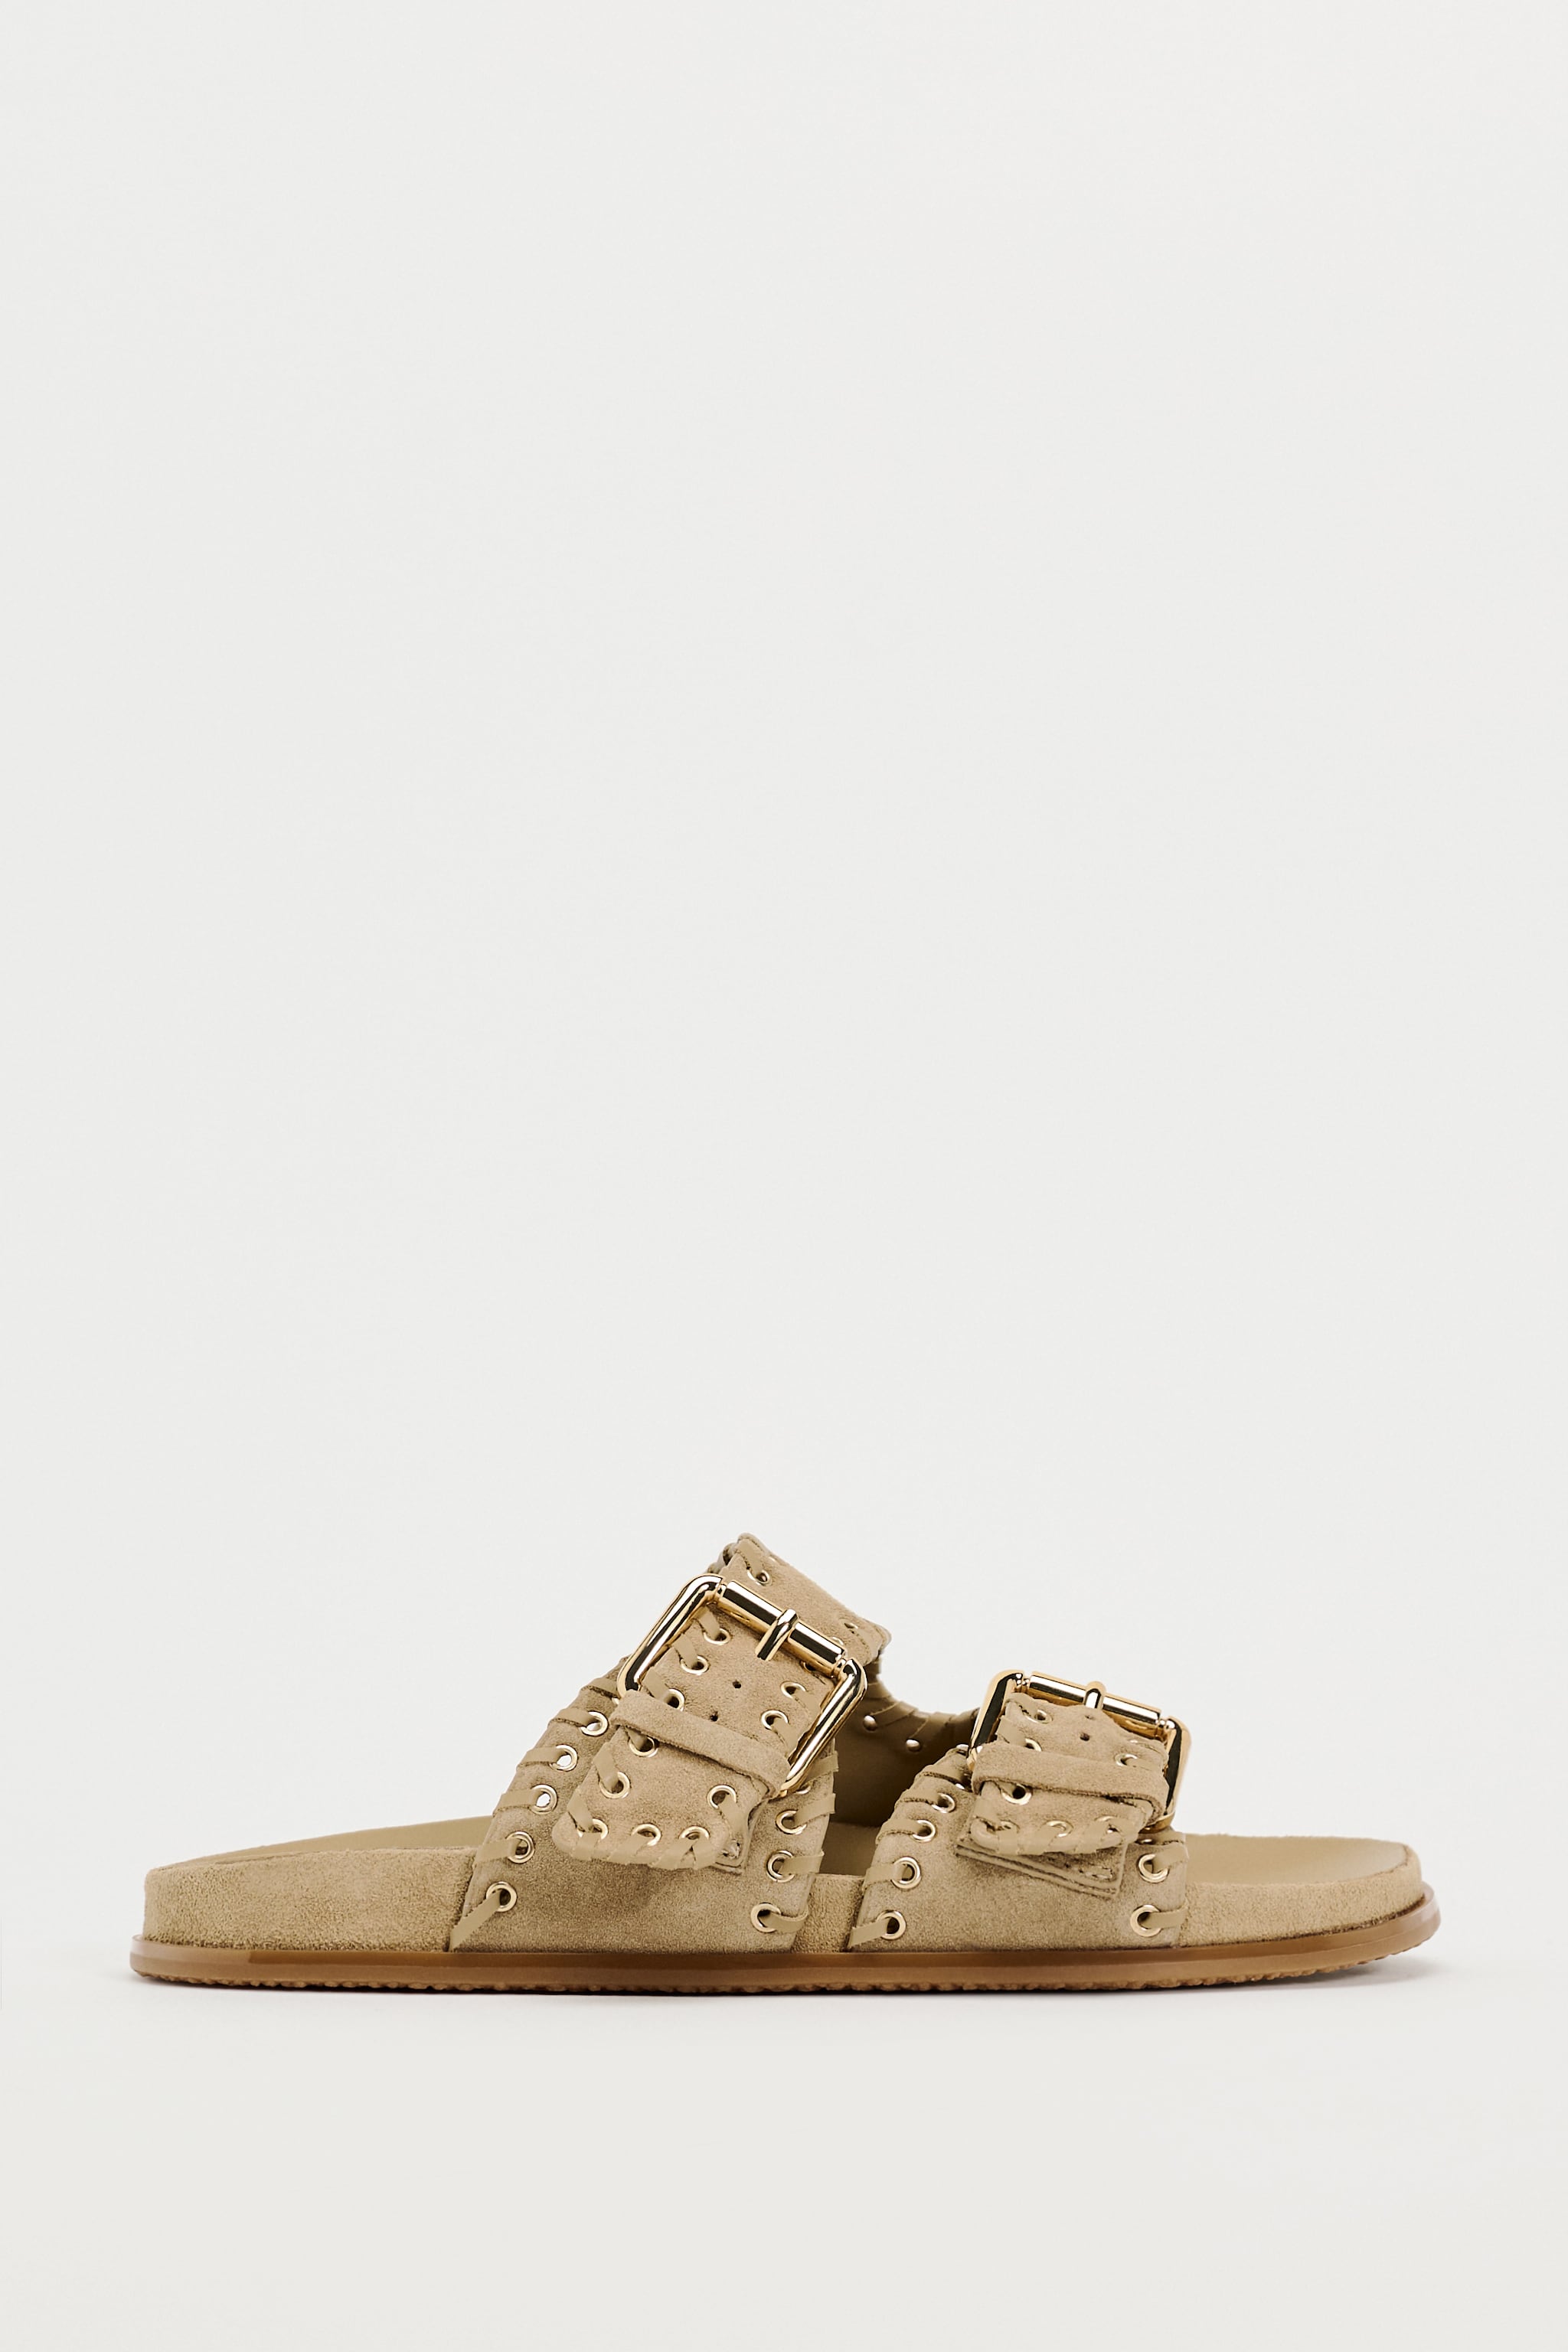 BUCKLED SUEDE SANDALS